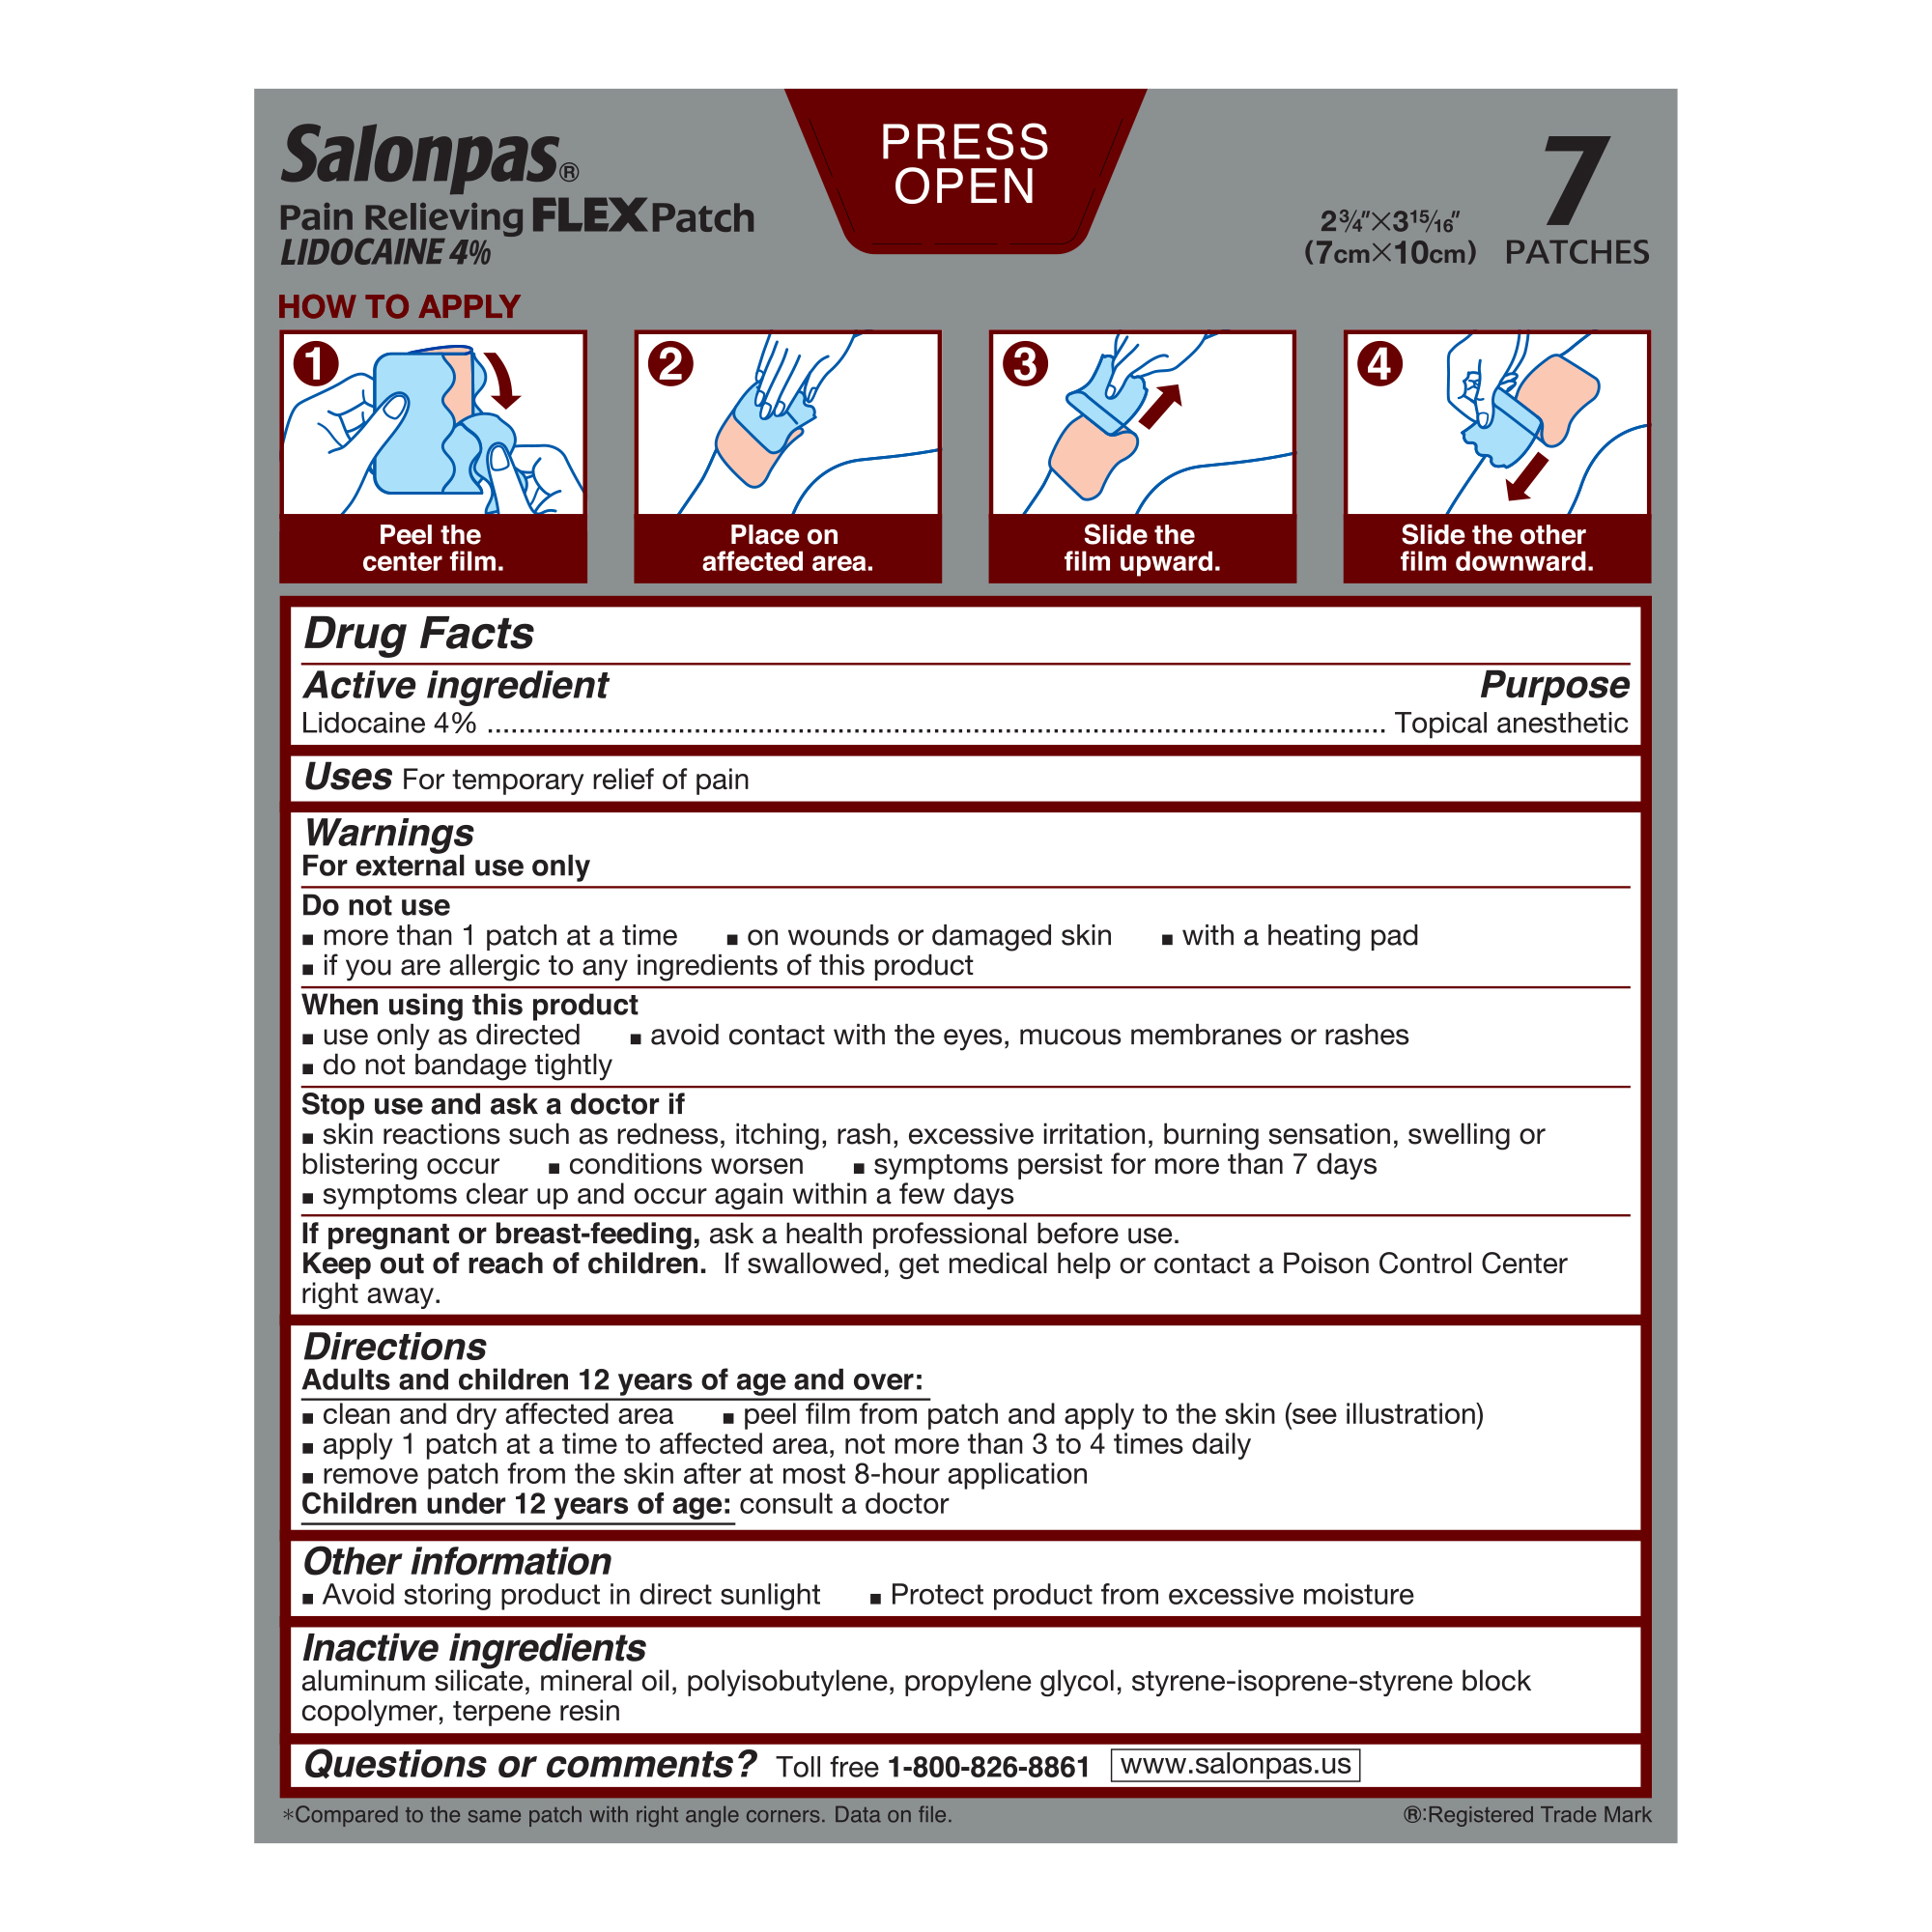 Salonpas Lidocaine 4% Pain Relief FLEX Patch, Unscented, Stays in Place, 7 Patches - image 8 of 9